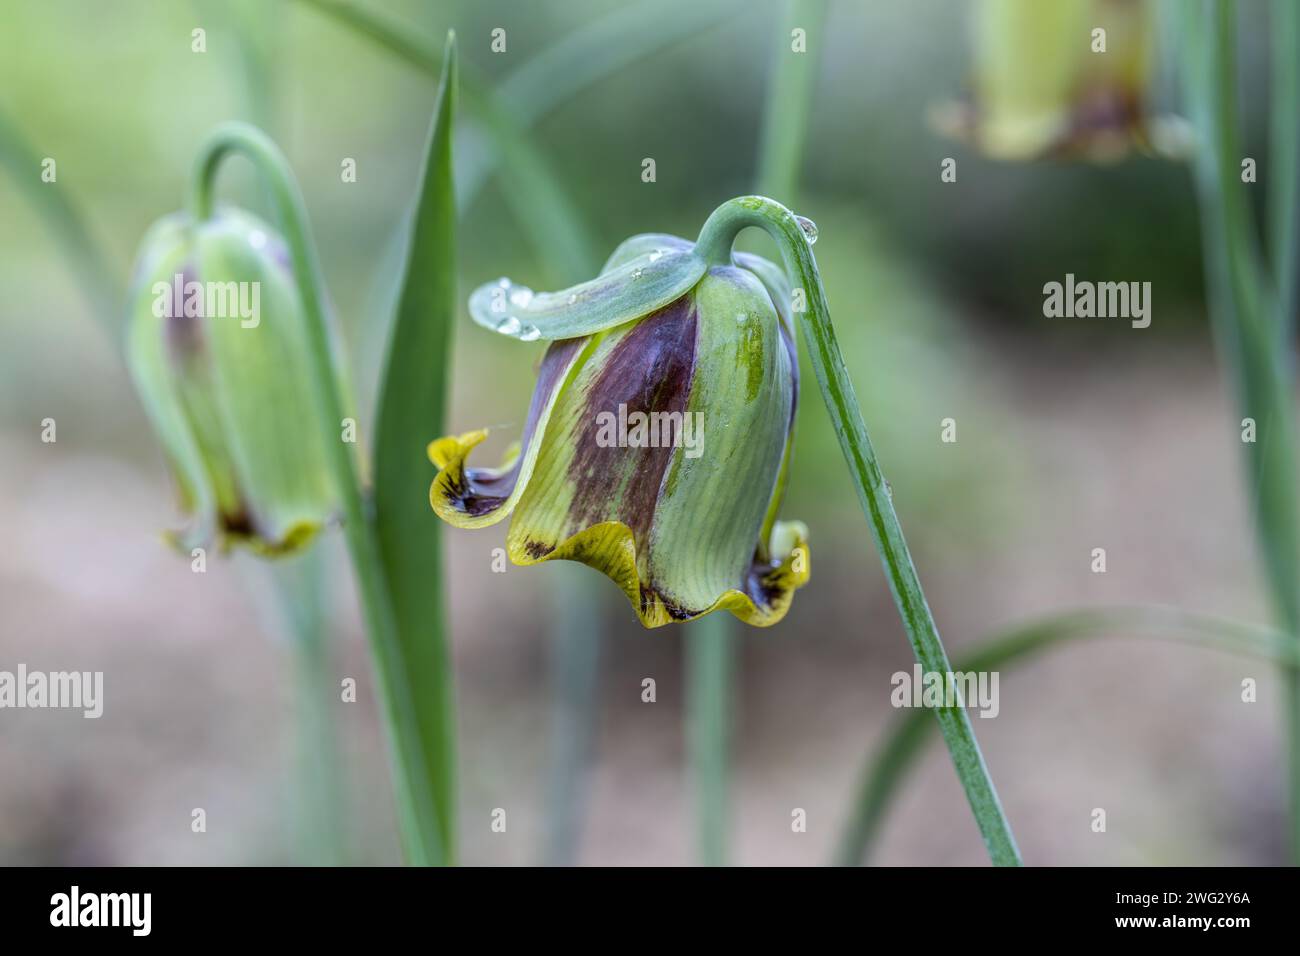 Fritillaria acmopetala, the pointed-petal fritillary bloom in spring in the garden on a sunny day Stock Photo